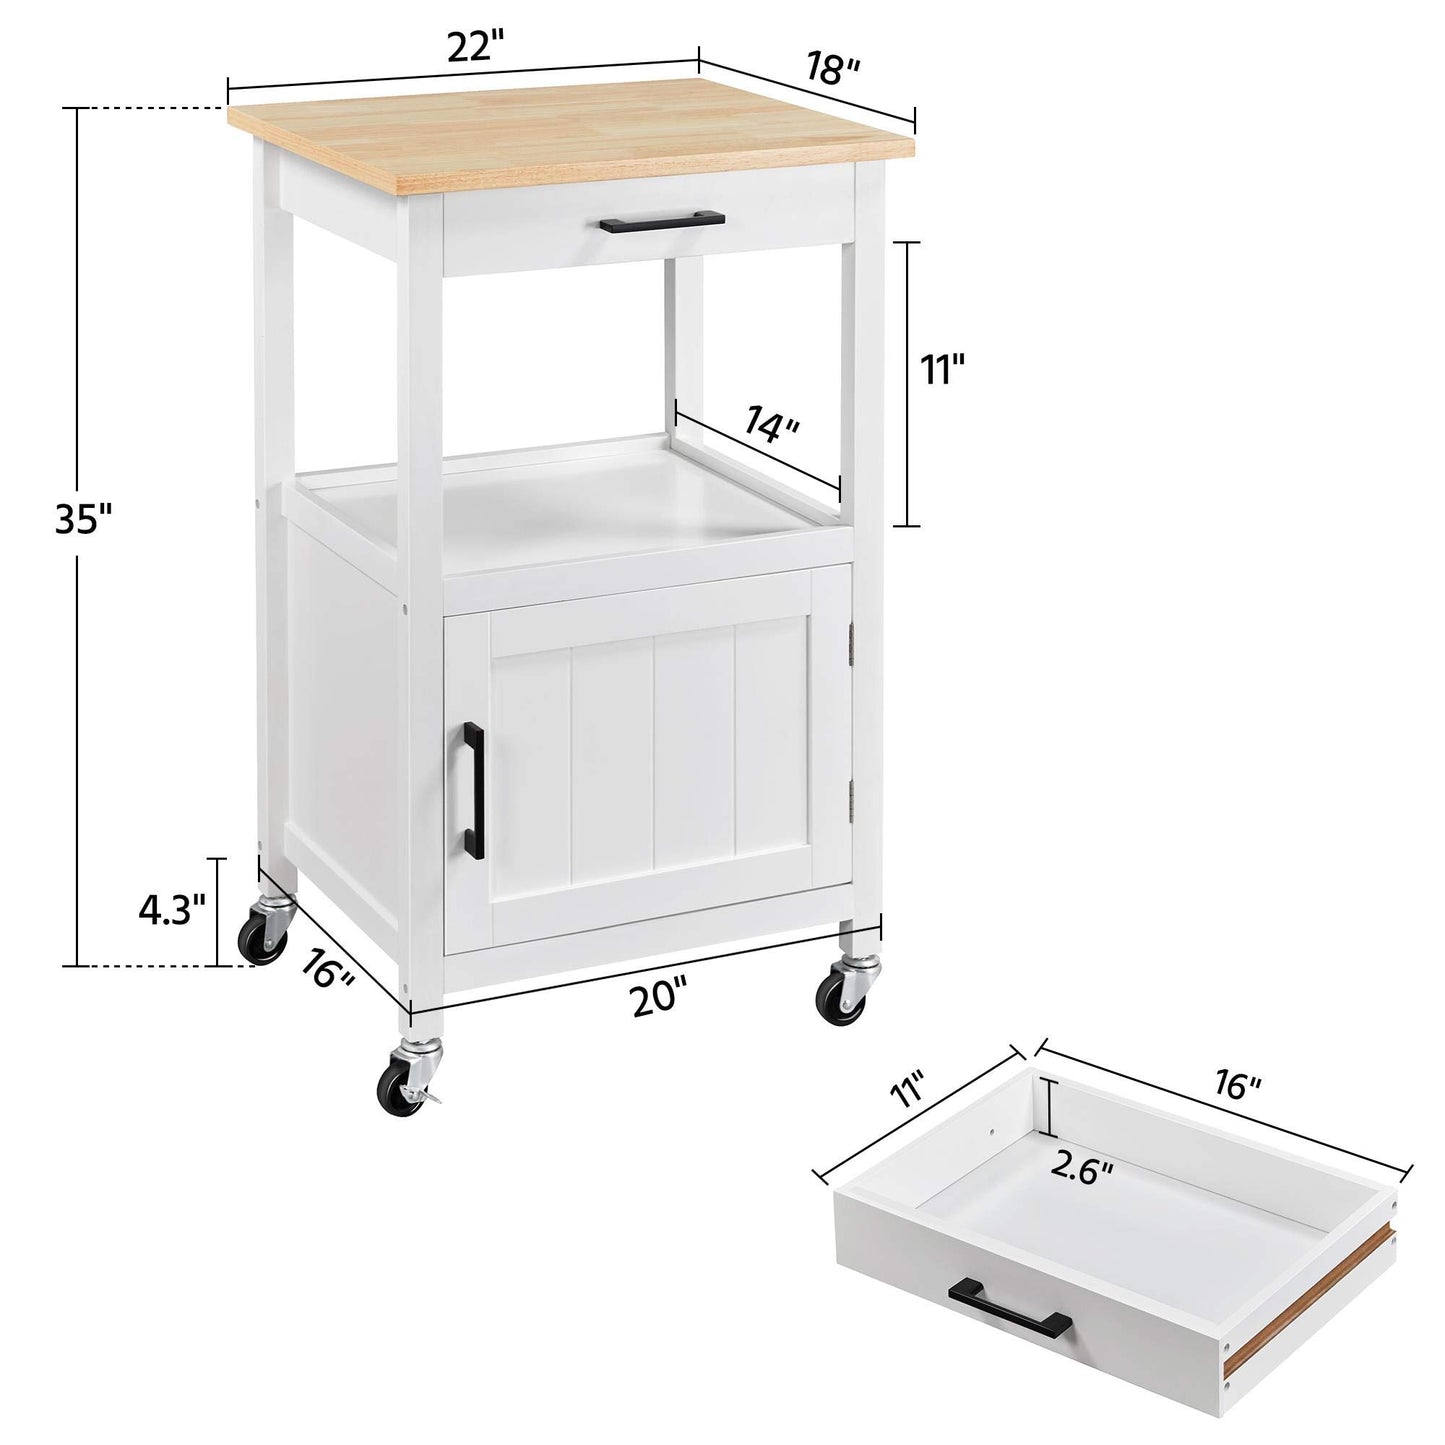 Yaheetech Rolling Kitchen Island with Single Door Cabinet, Kitchen Cart with Drawer on Swivel Wheels, Small Coffee Cart Microwave Stand with 3 Side Hooks for Dining Room, White